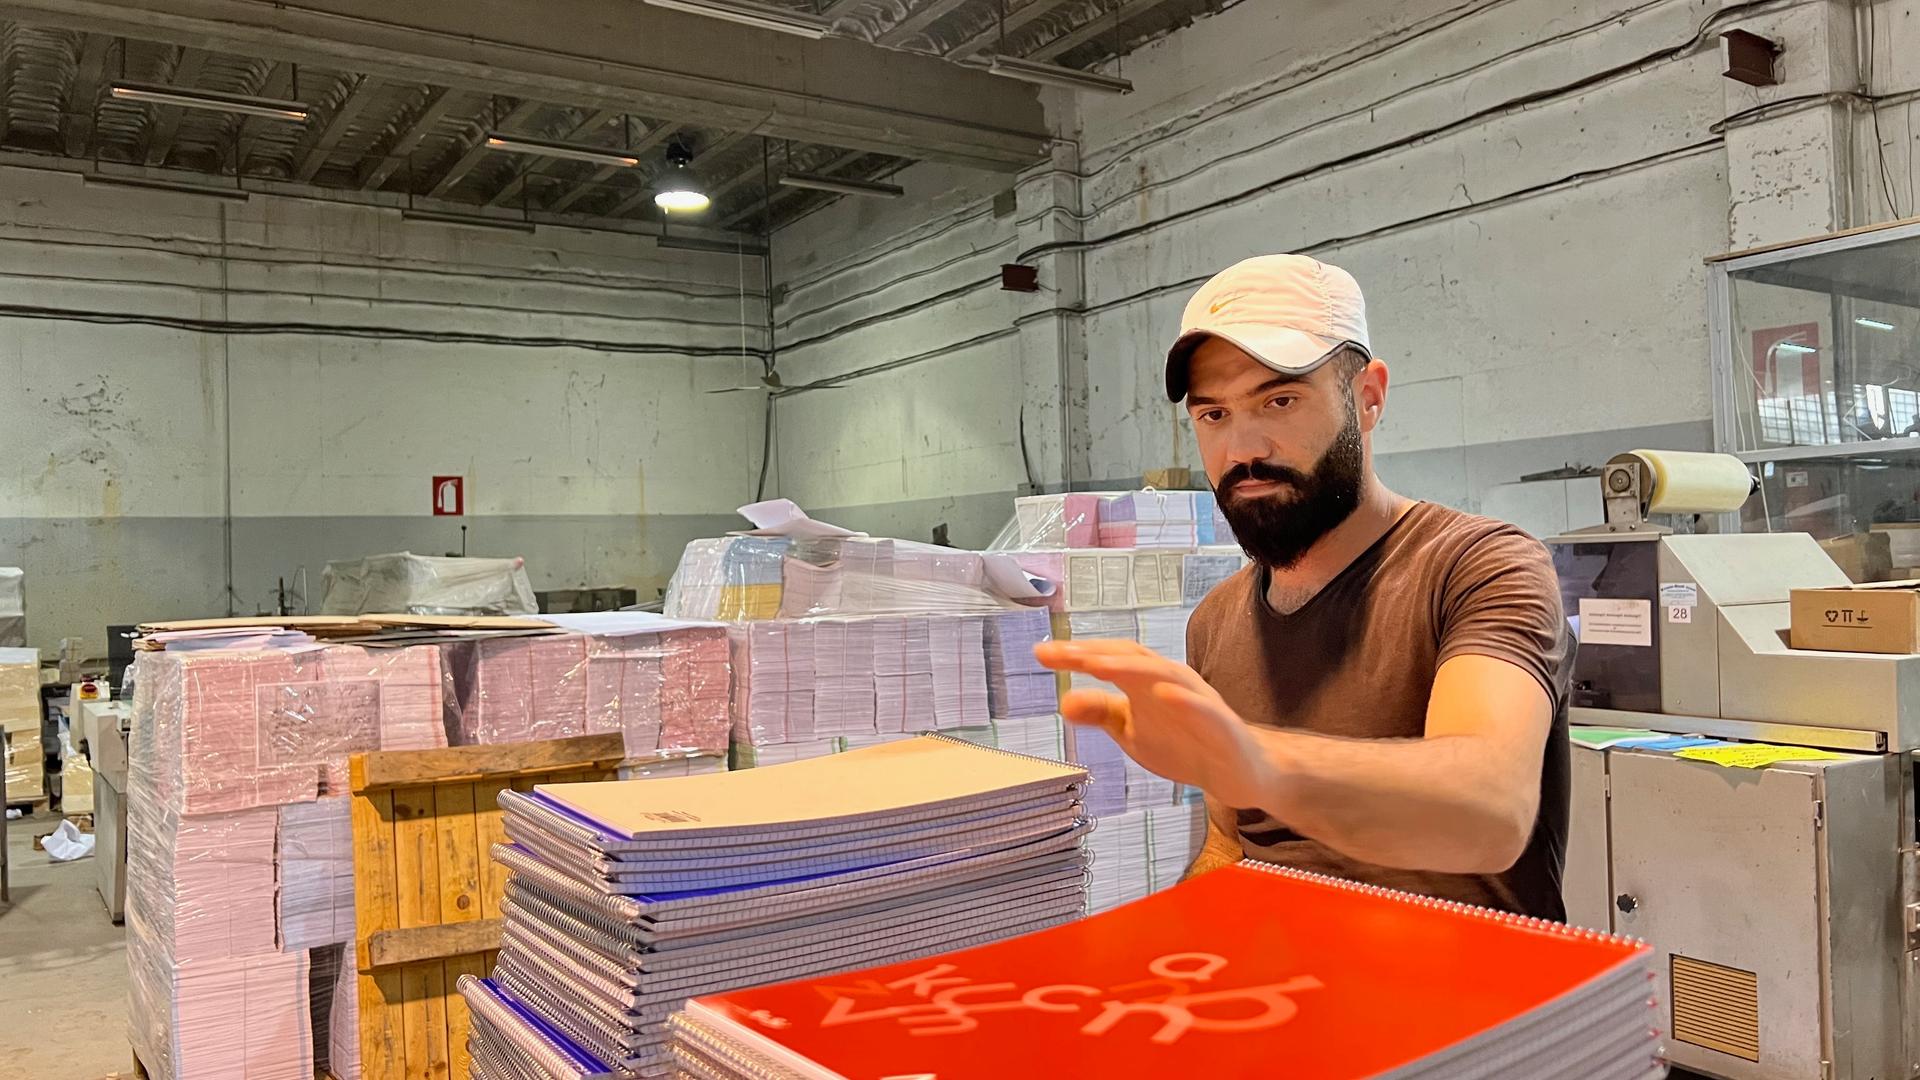 Twenty-four-year-old Abdel Ghani Ali Ghanoum works at a paper factory on the outskirts of Beirut. The economic crisis in Lebanon and the recent Saudi ban on Lebanese imported goods means he faces an uncertain future. He is considering taking a boat to Tur